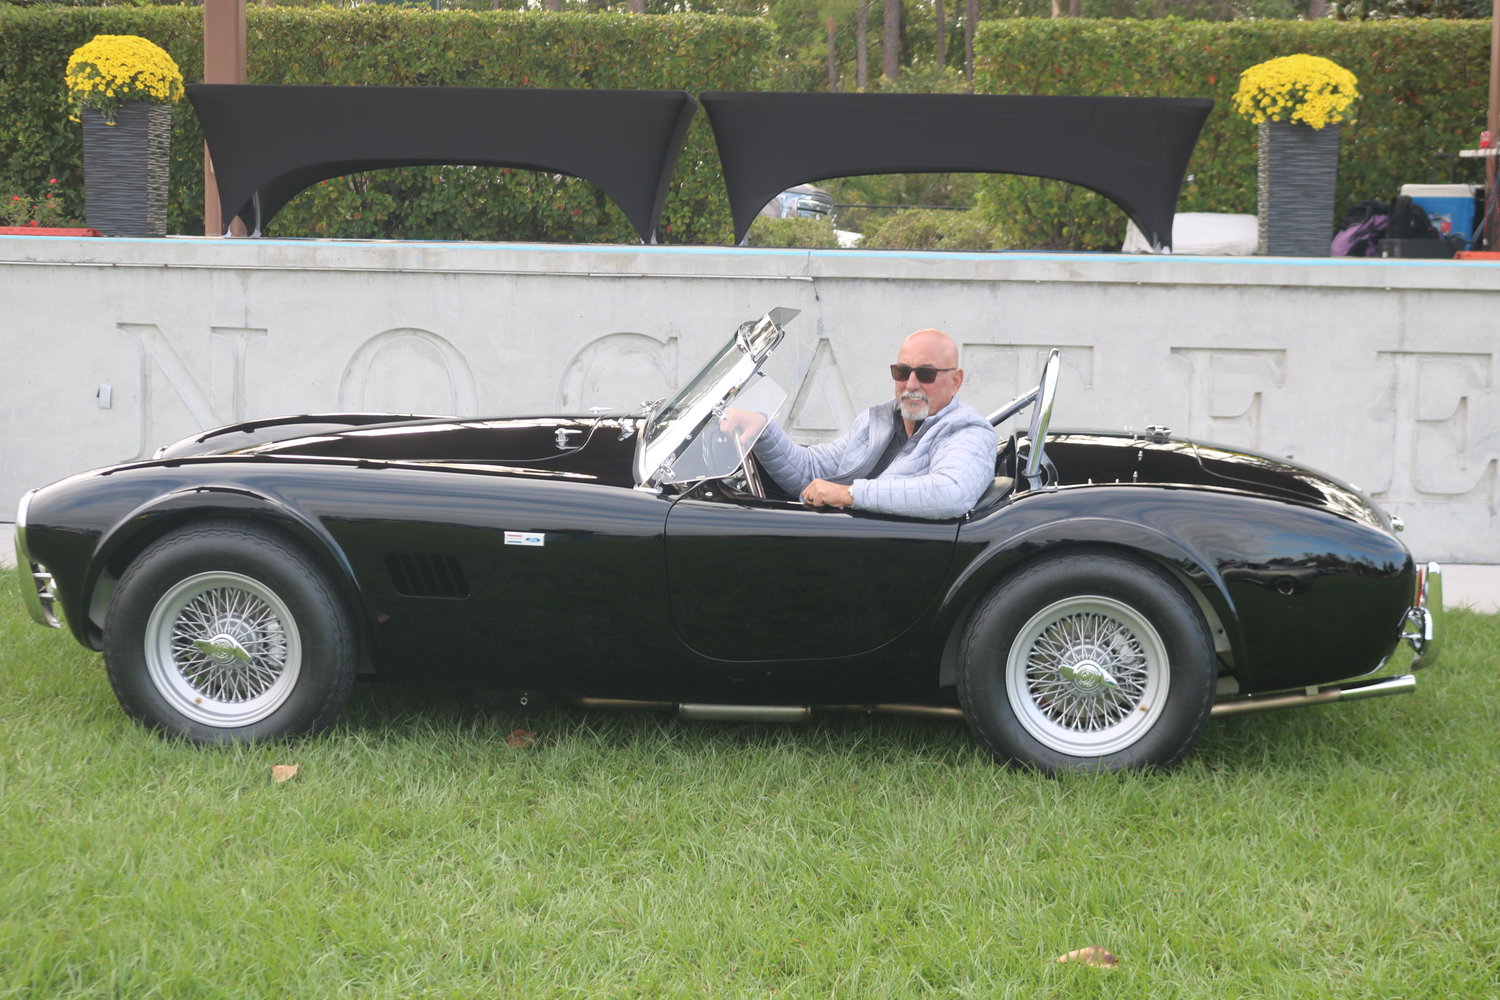 Indy 500 winner Bobby Rahal and his 1965 AC Cobra was named “Best in Show” at the 2022 Ponte Vedra Auto Show Nov. 13. Nocatee Station Field was filled with 175 cars that ranged from a wide array of makes, models and eras.